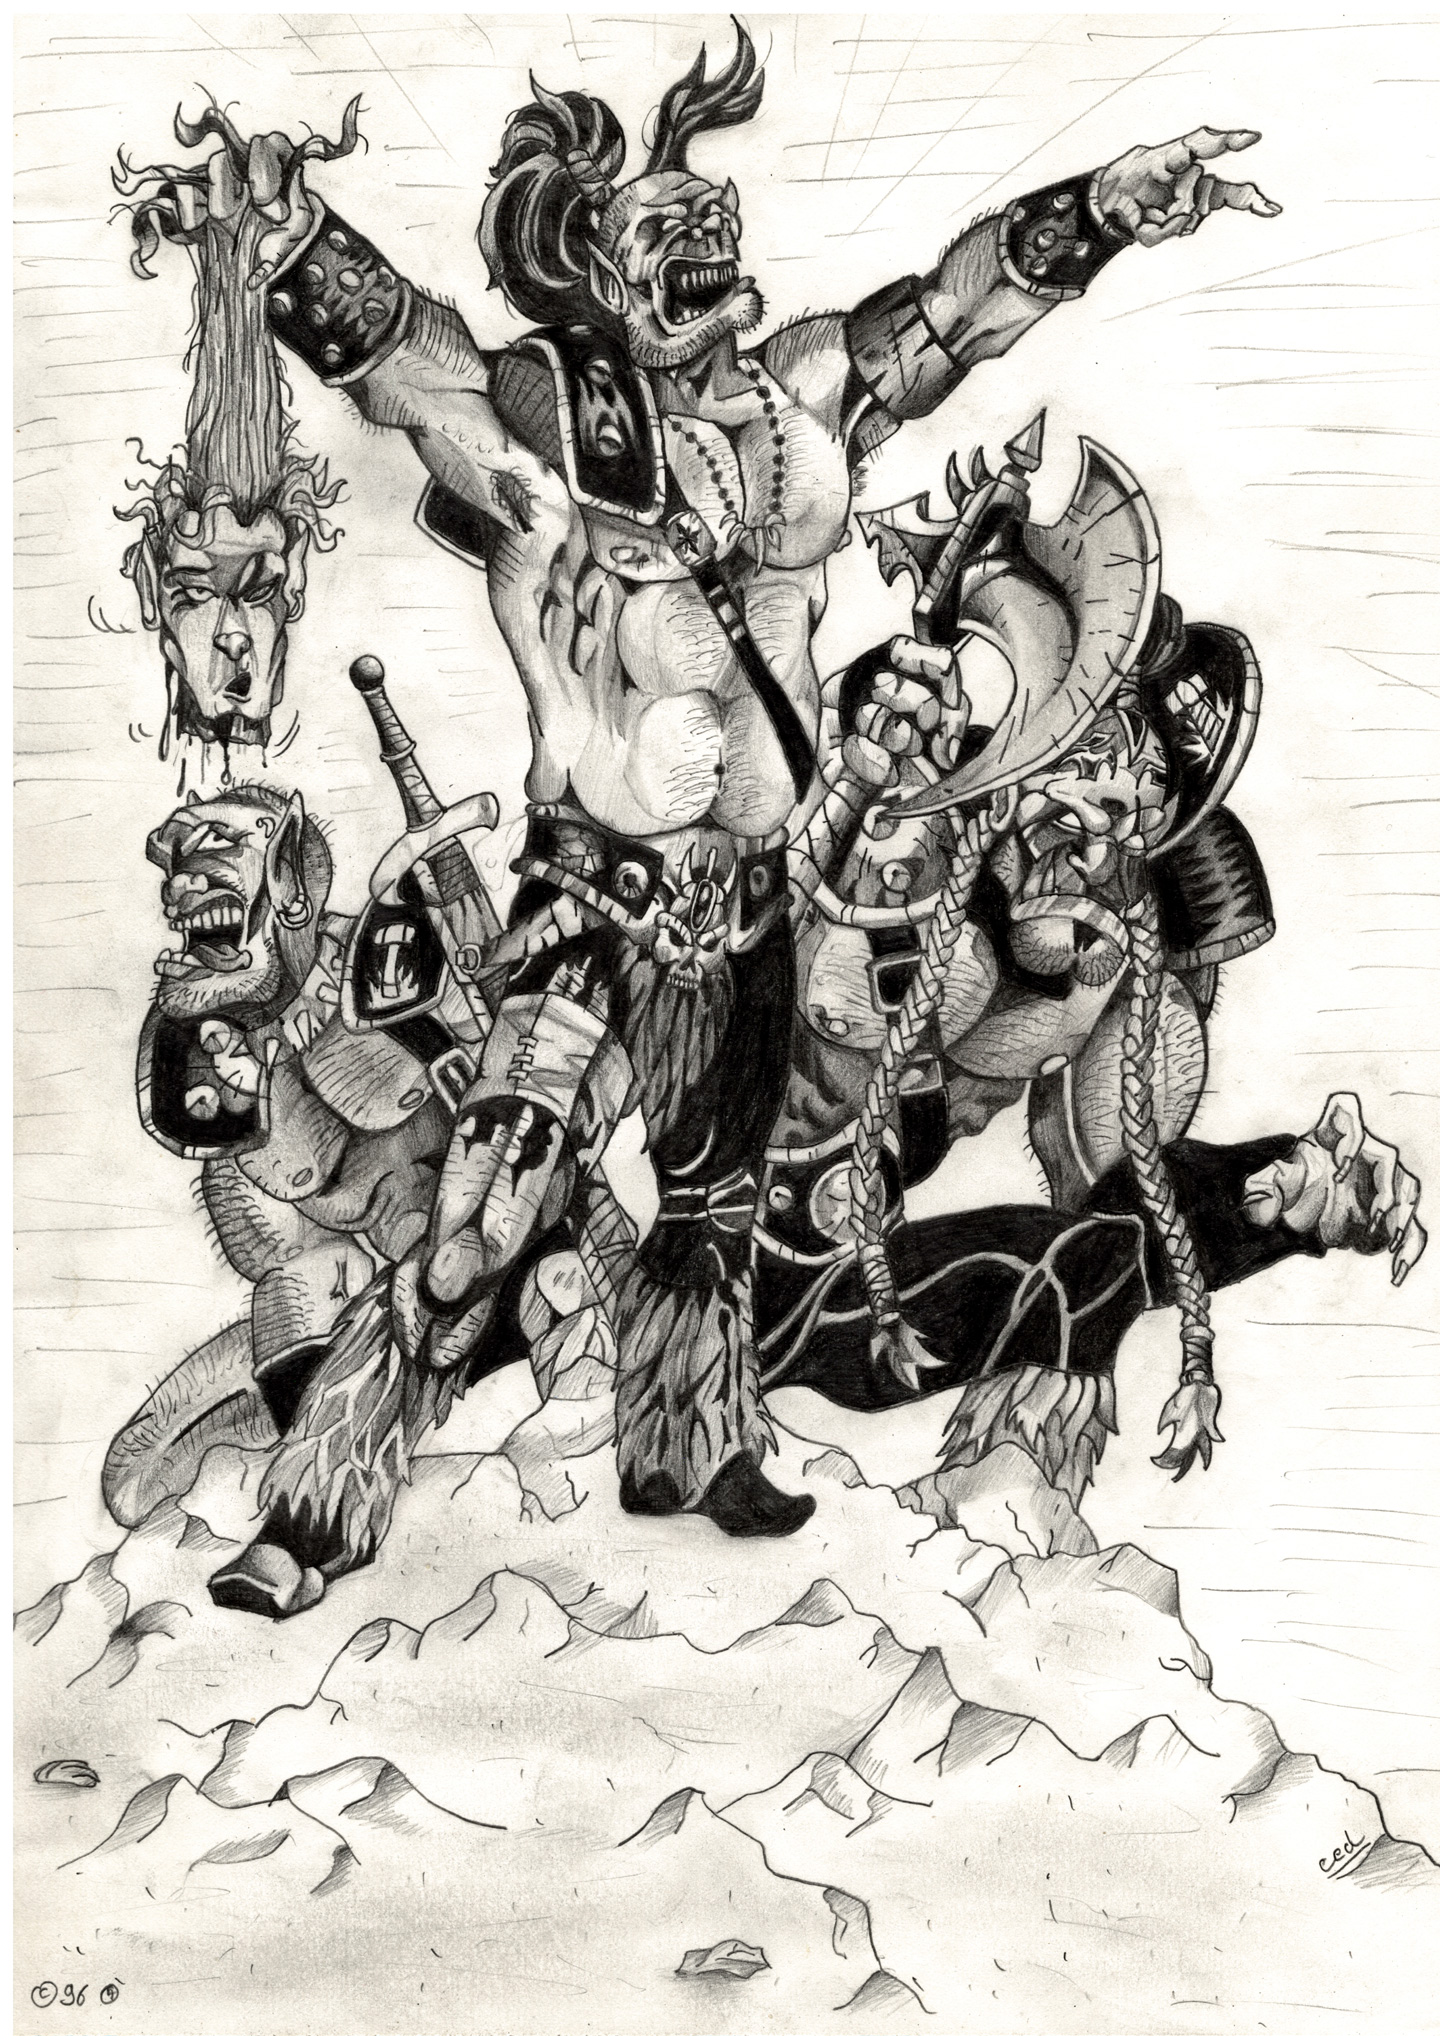 A drawing about orcs having decapitated a human